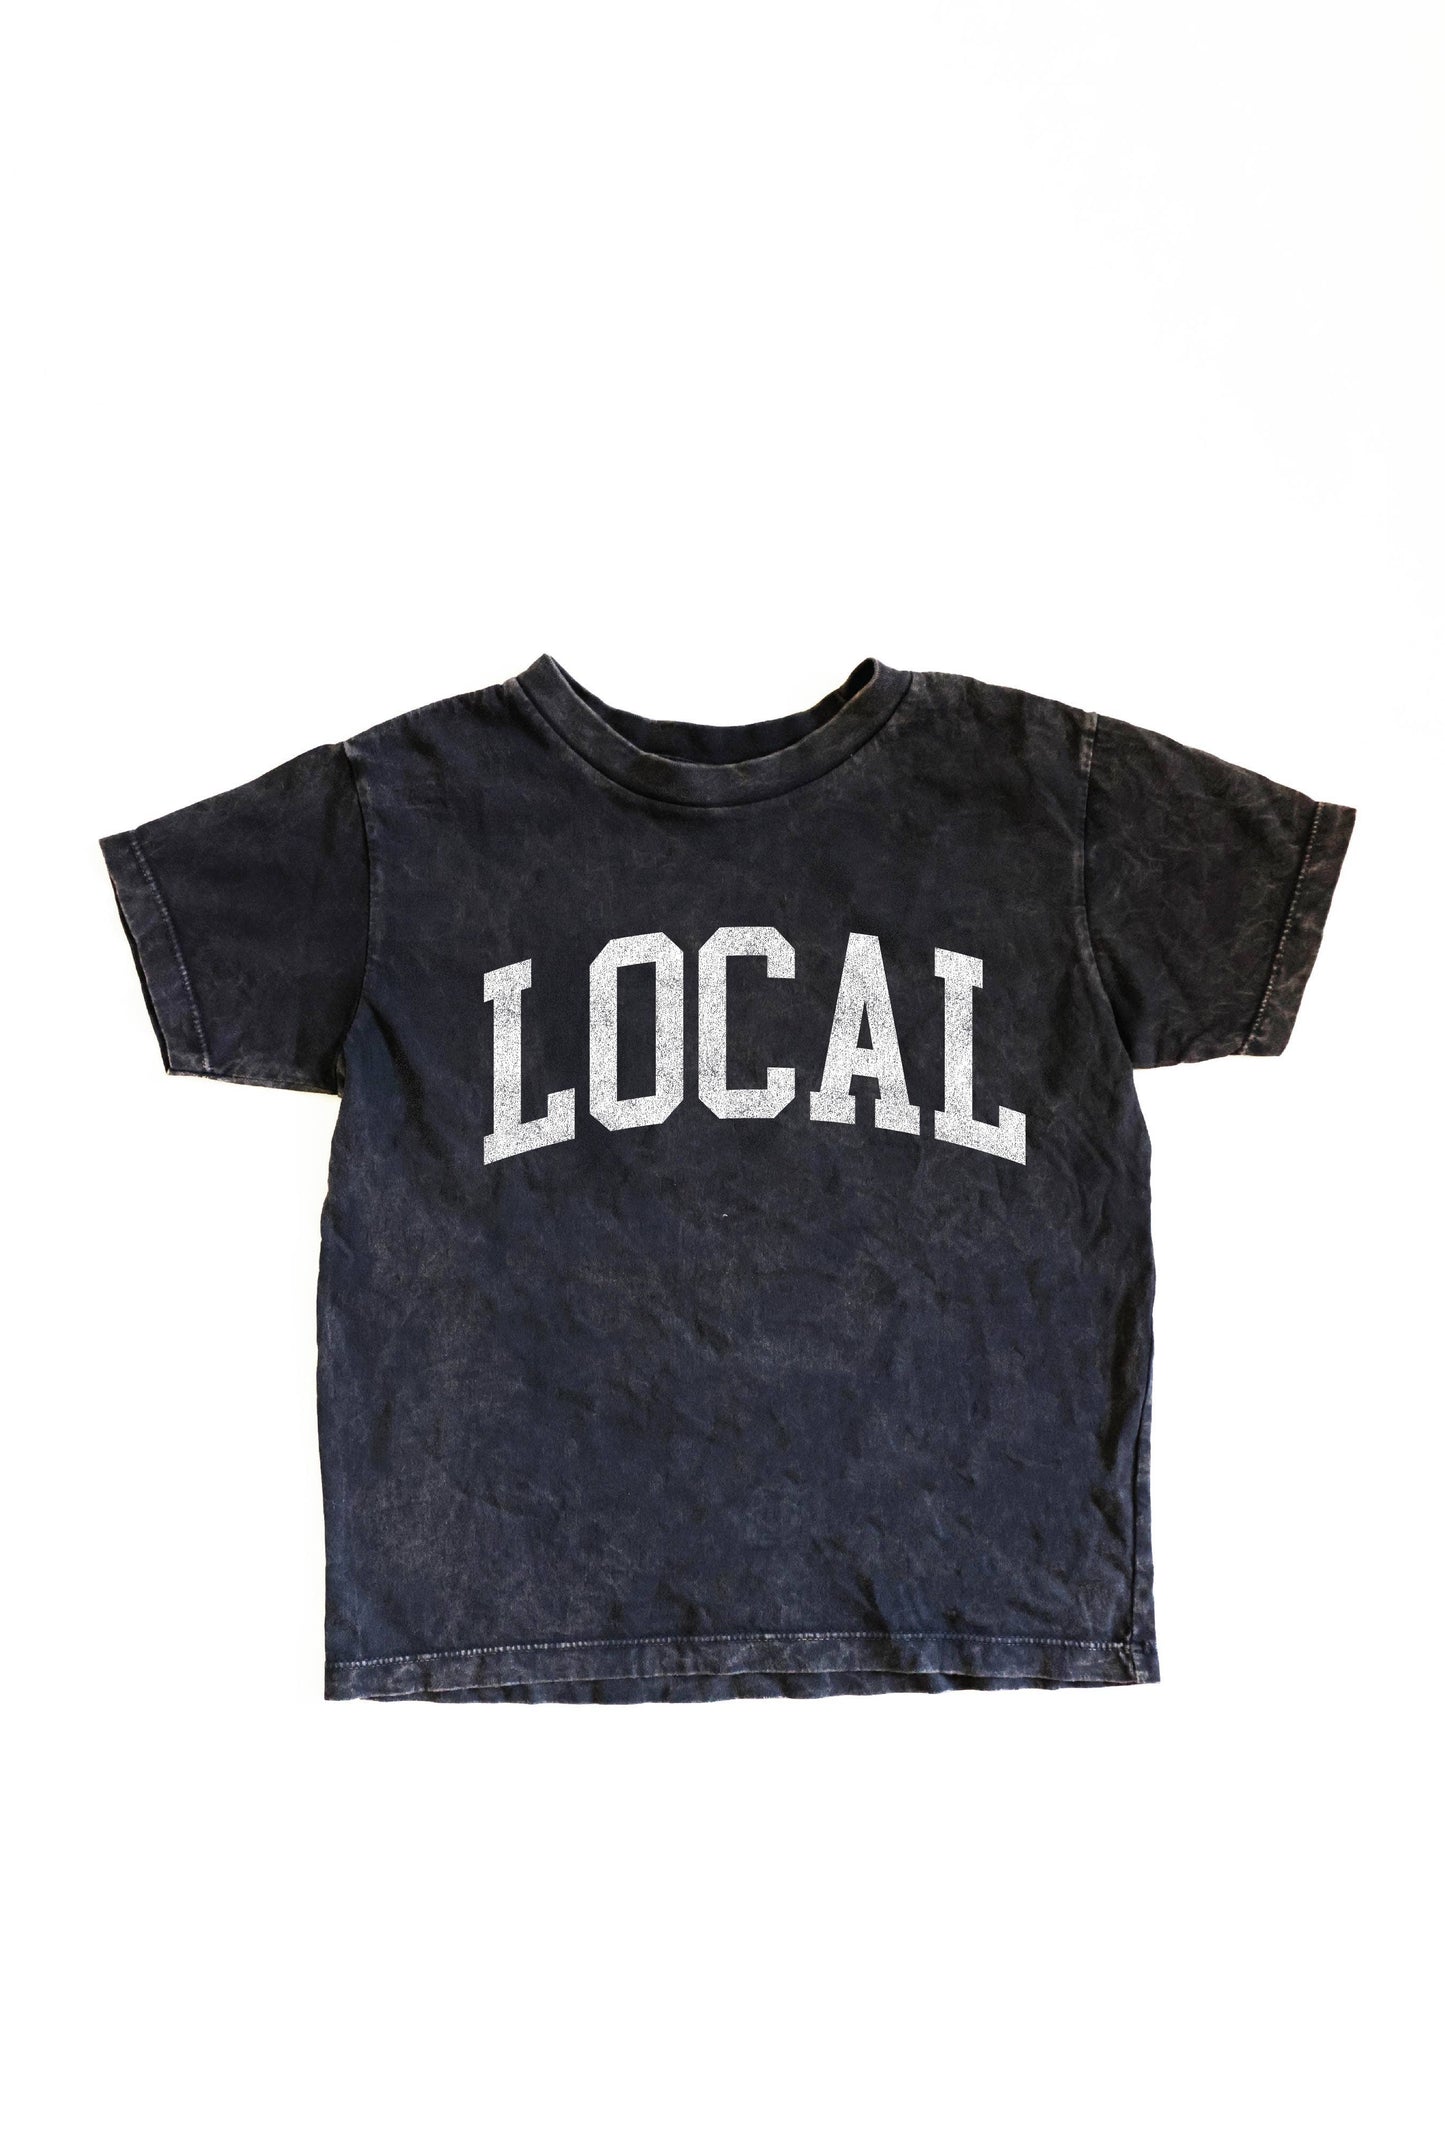 LOCAL Toddler Washed Graphic Top